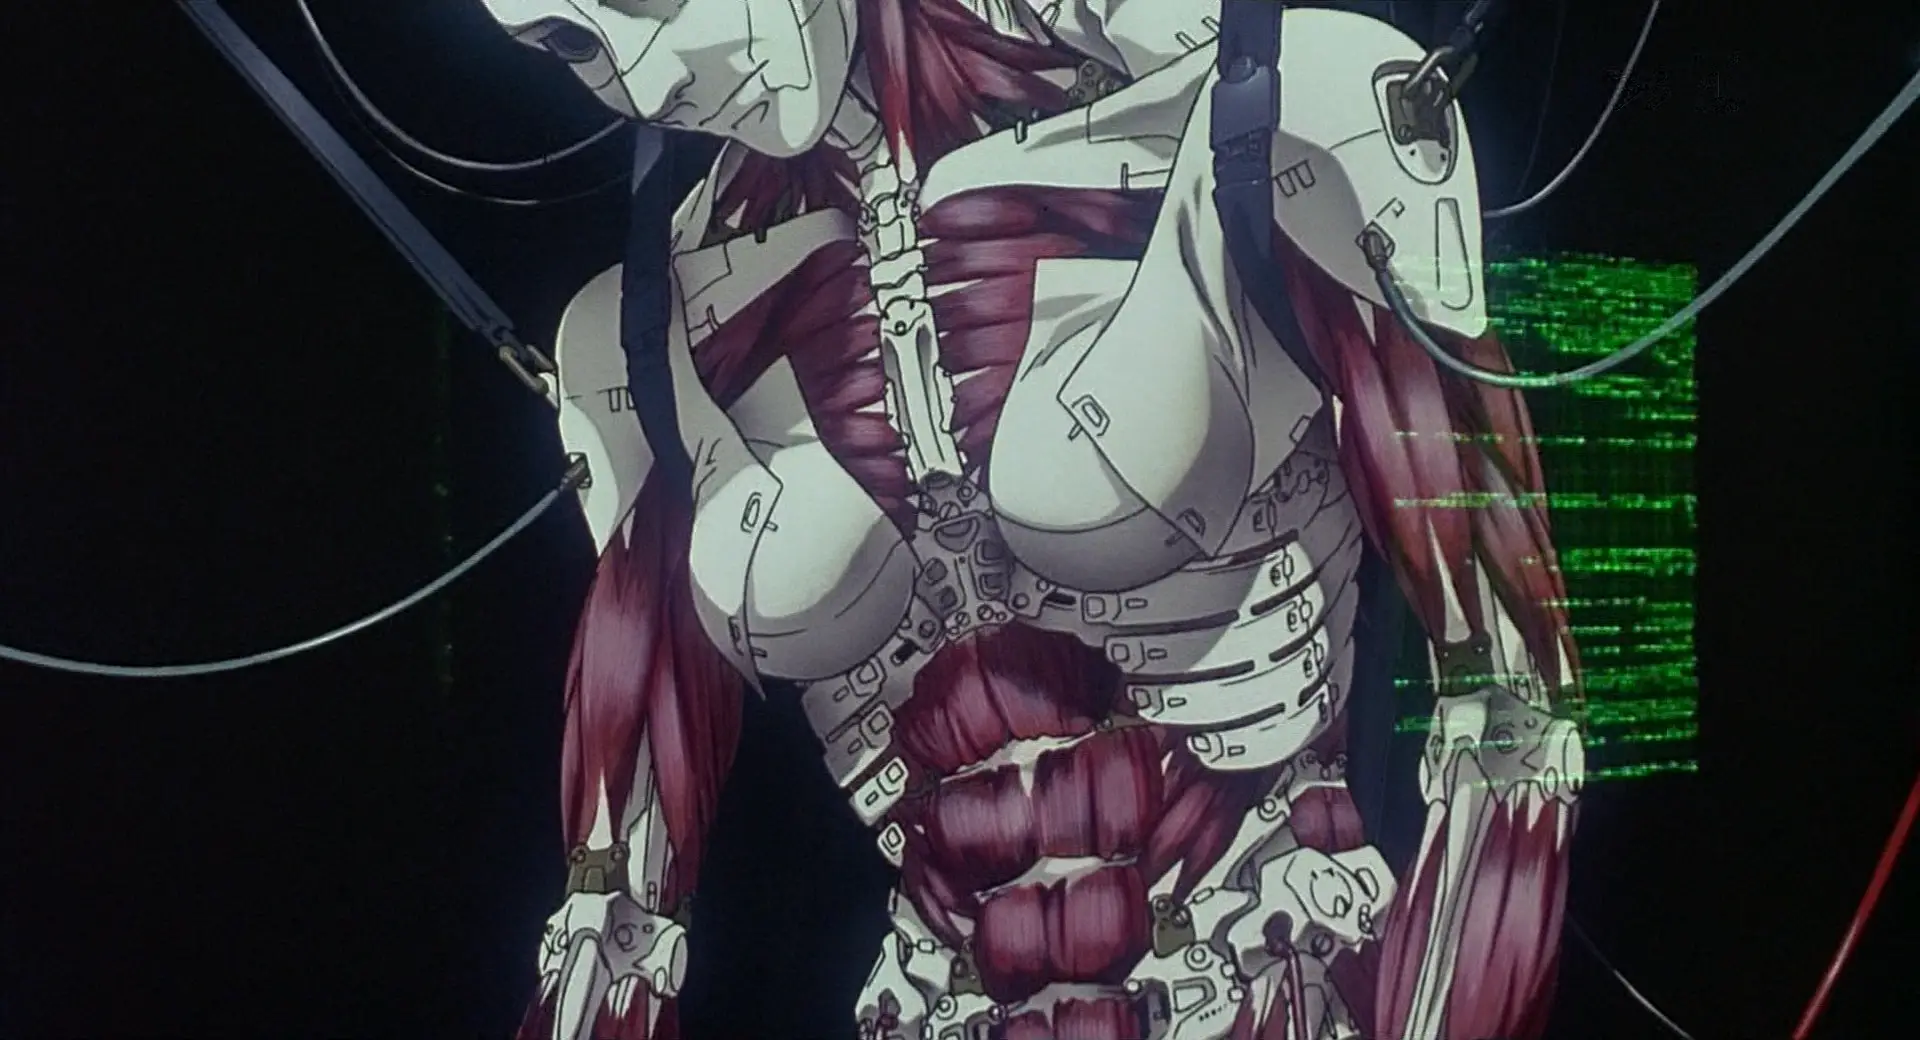 Still from GitS. A cyborg body hangs suspended in the process of construction.